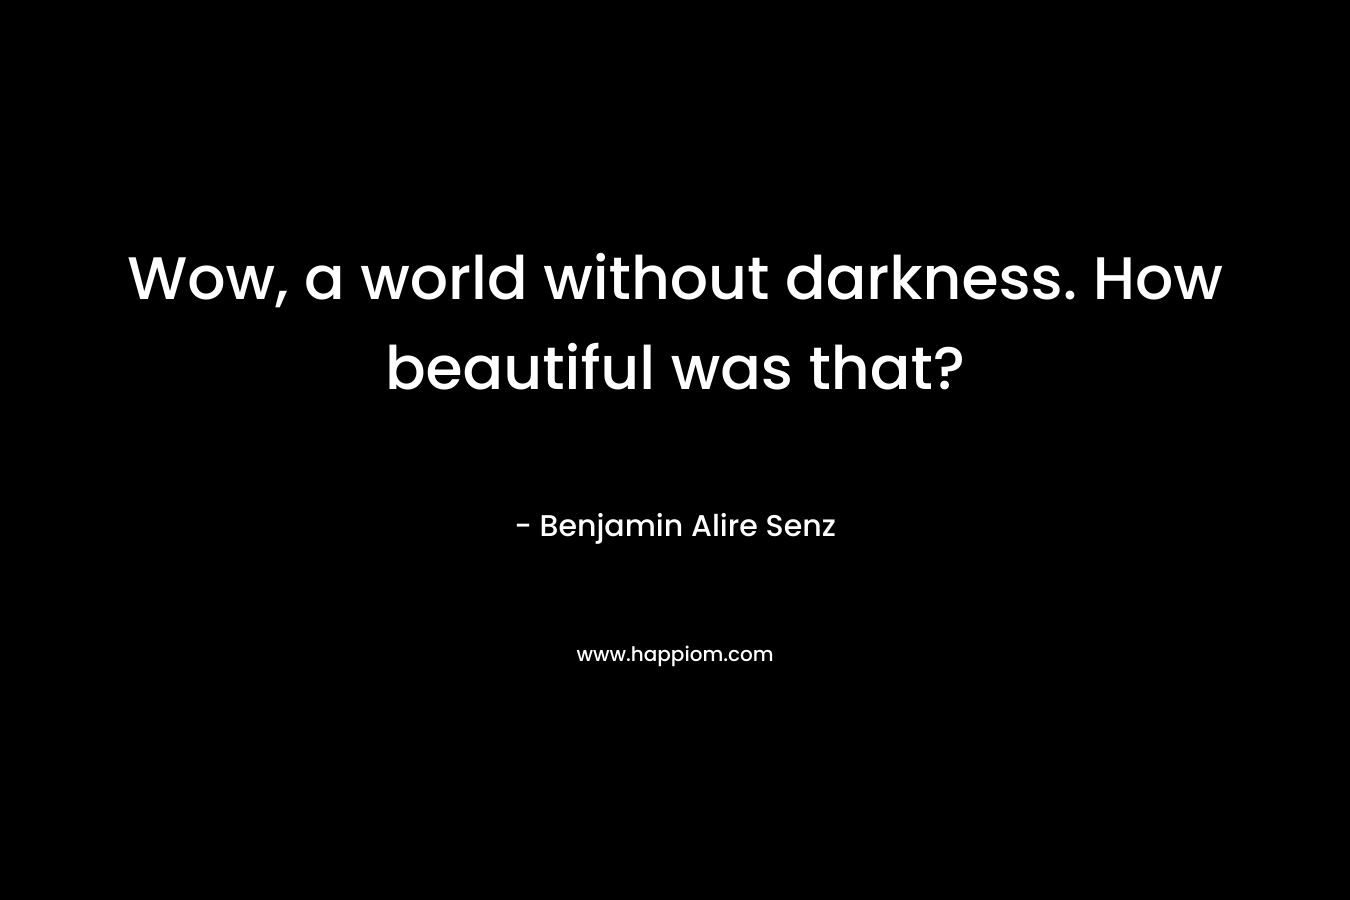 Wow, a world without darkness. How beautiful was that?